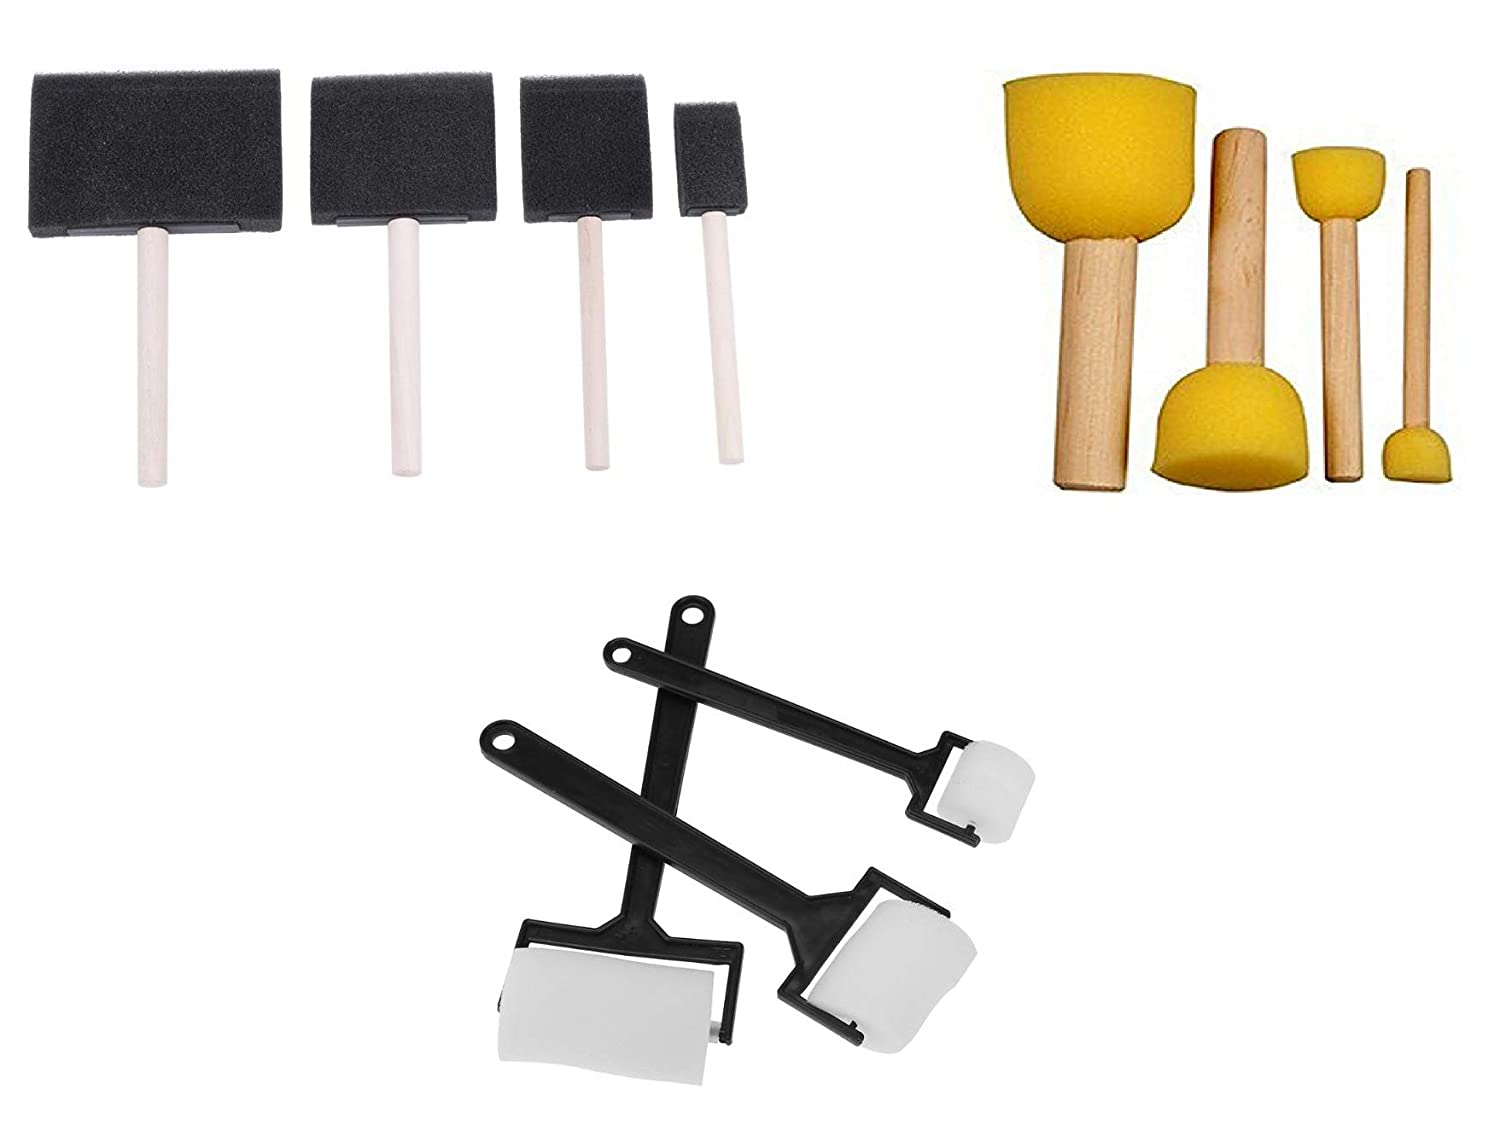 Sponge Brush Ser for Painting, Art and Craft Projects (Complete Set with Roller, Flat and Round Sponge Brushes)